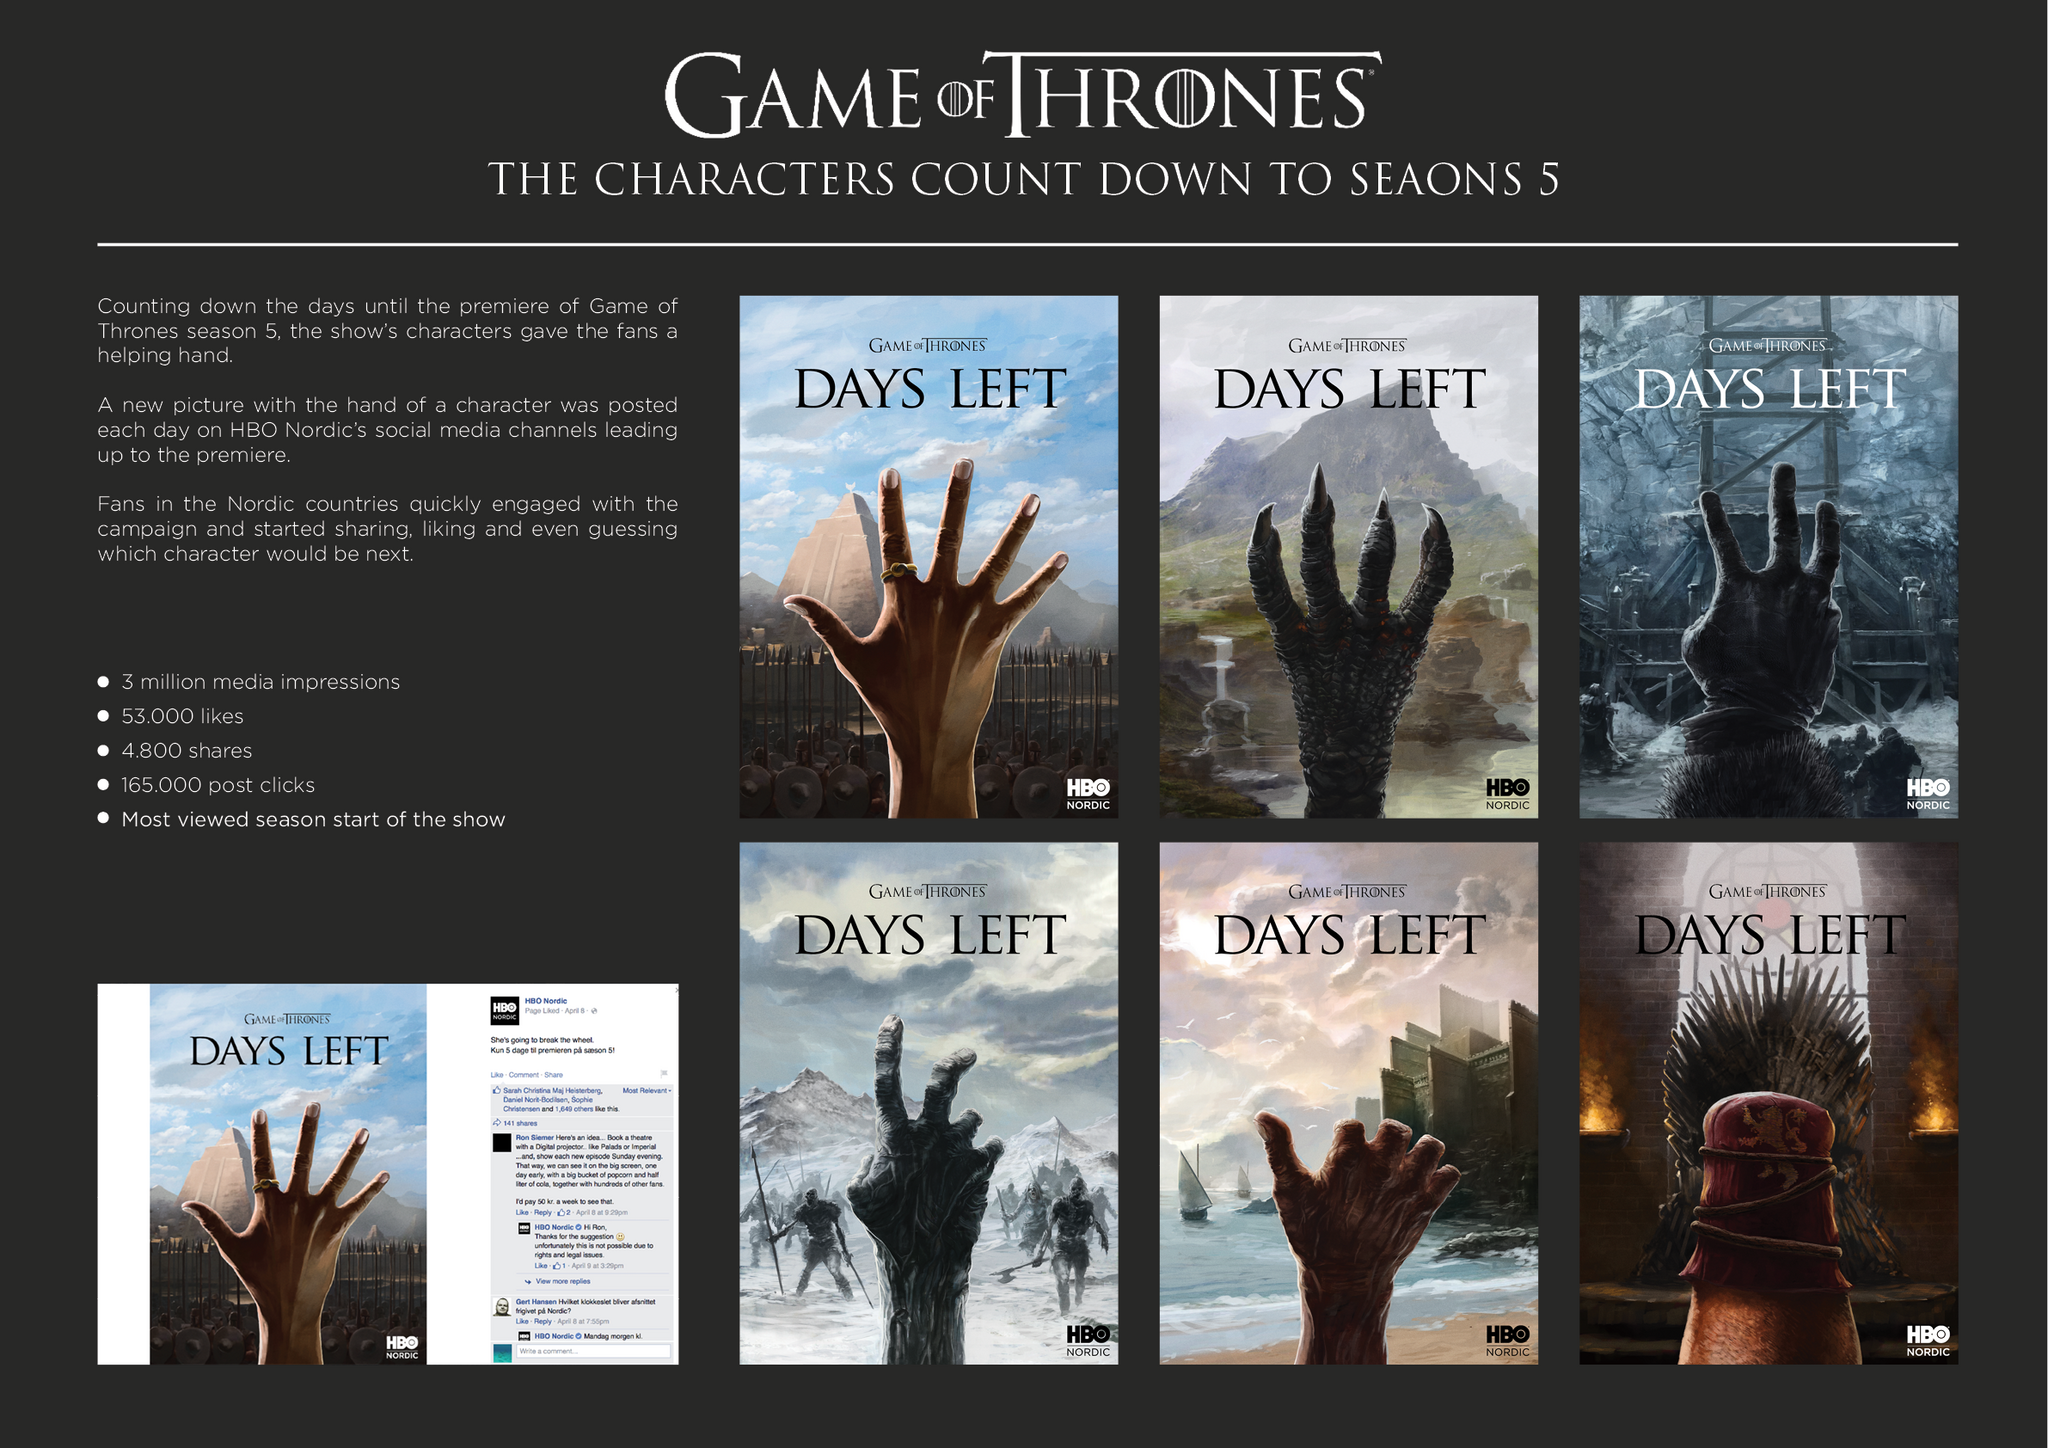 THE GAME OF THRONES CHARACTERS COUNTDOWN